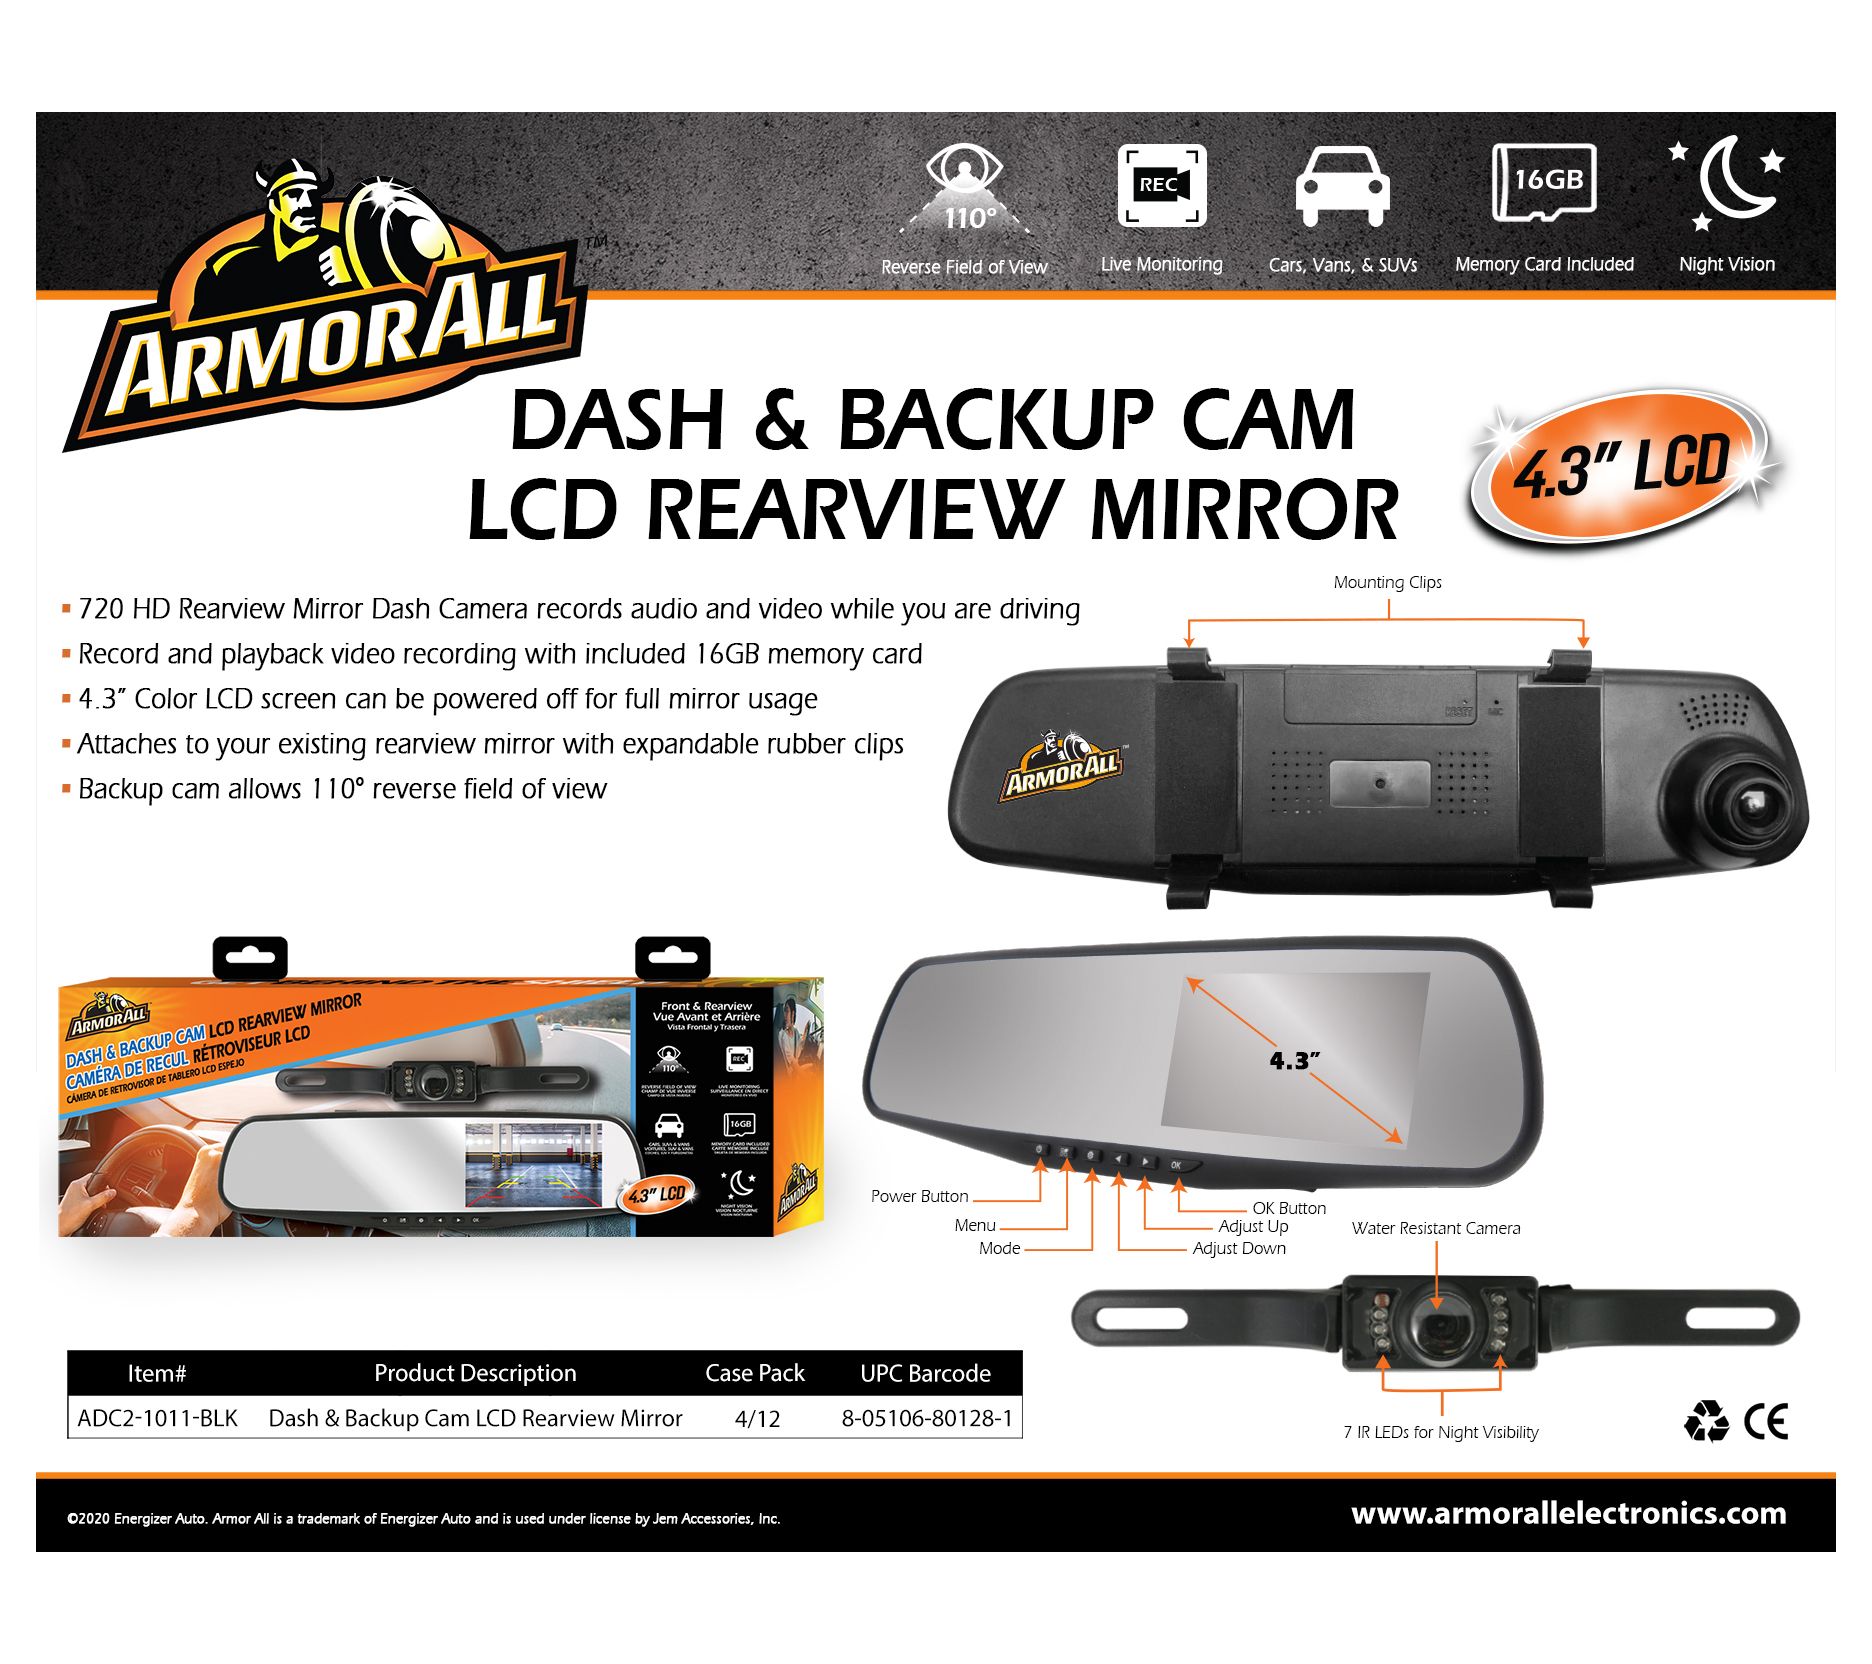 ArmorAll Rearview Mirror Dash & Backup Vehicle Camera